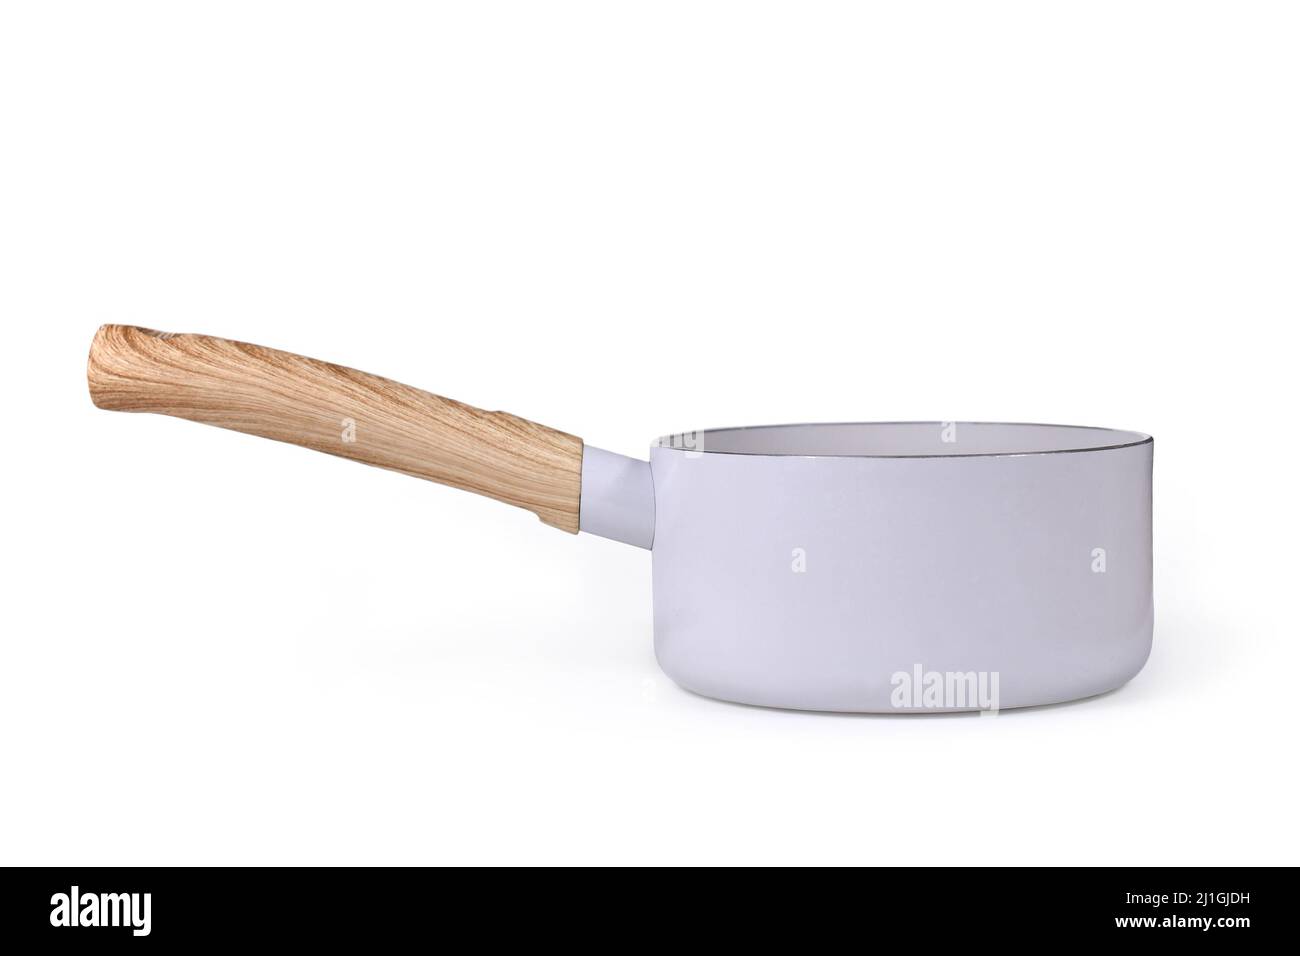 Gray cooking pot with wooden handle on white background Stock Photo